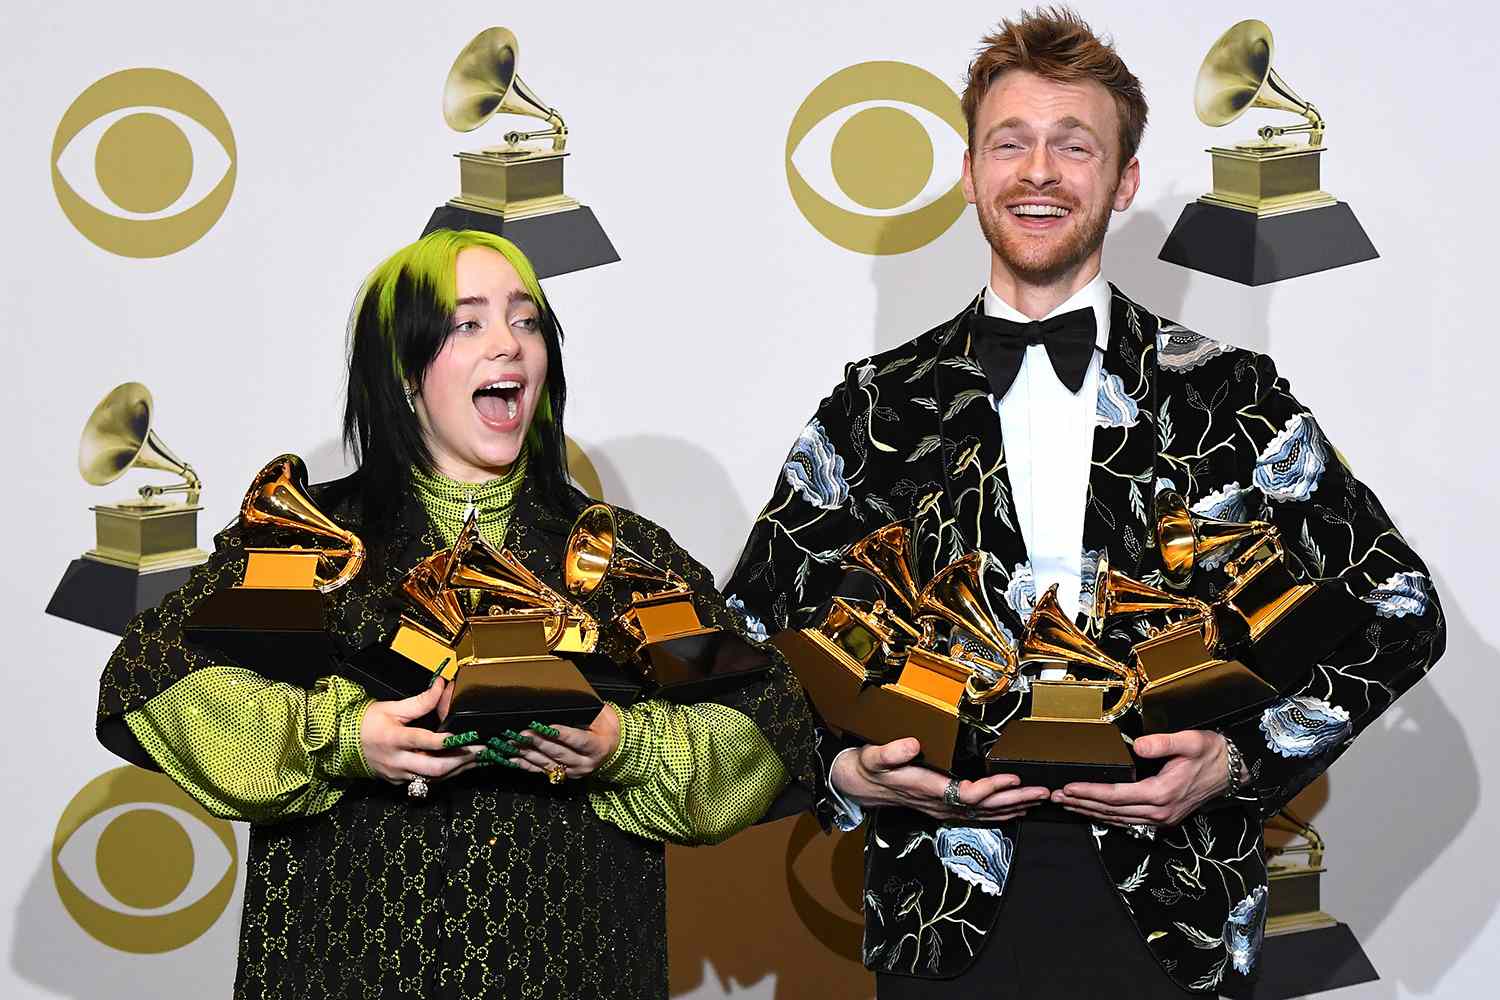 Billie Eilish And Finneas O'Connell Make History With Oscar Win